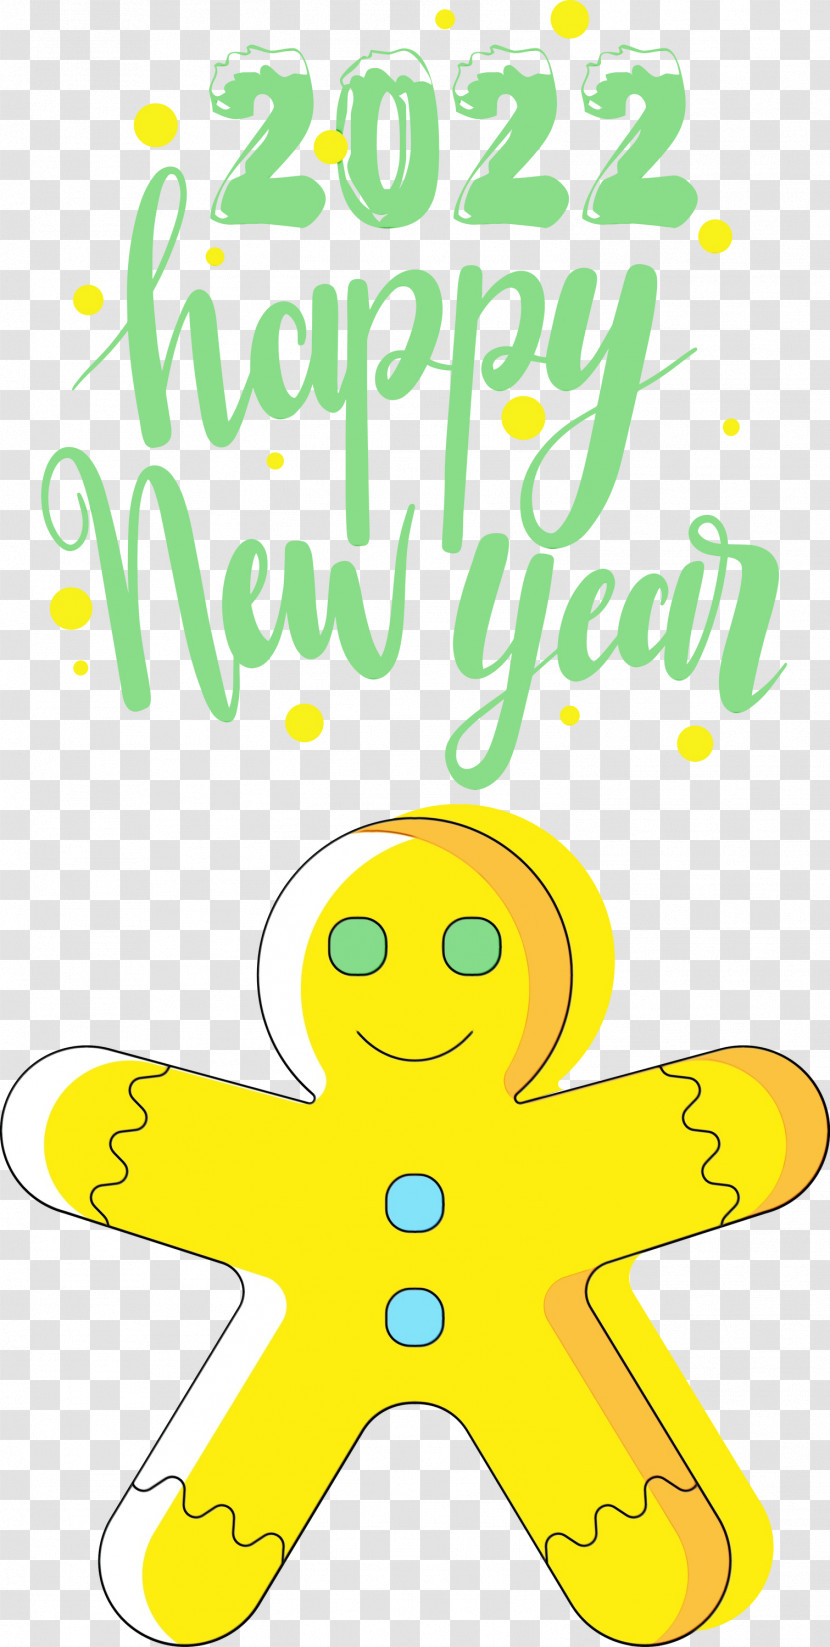 Cartoon Yellow Smiley Line Happiness Transparent PNG